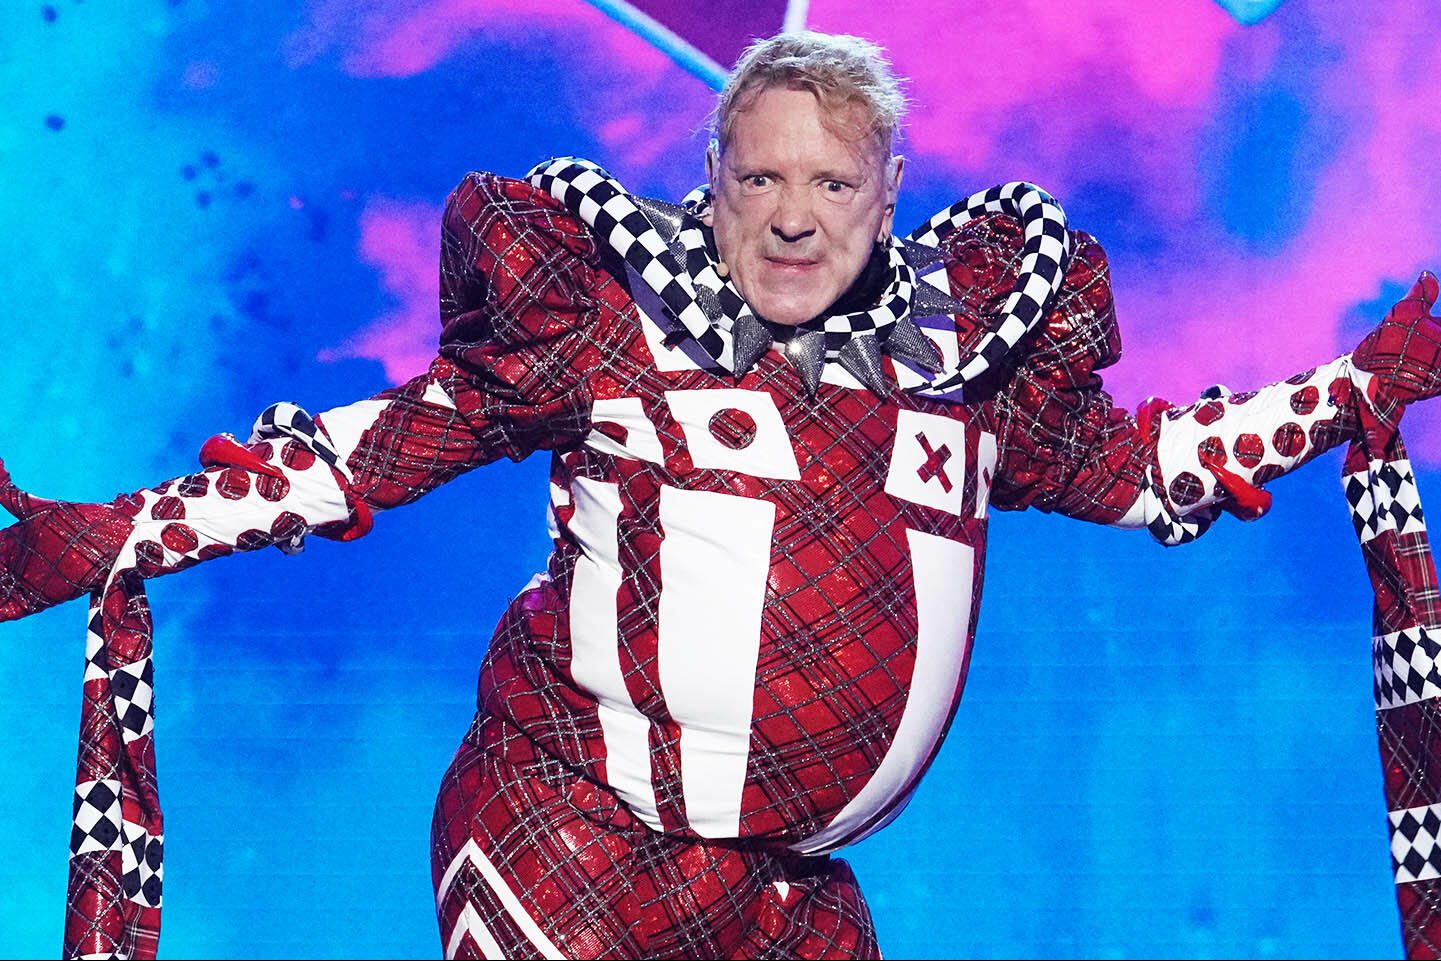 John Lydon, aka Johnny Rotten of the Sex Pistols, revealing himself to be the Jester on The Masked Singer